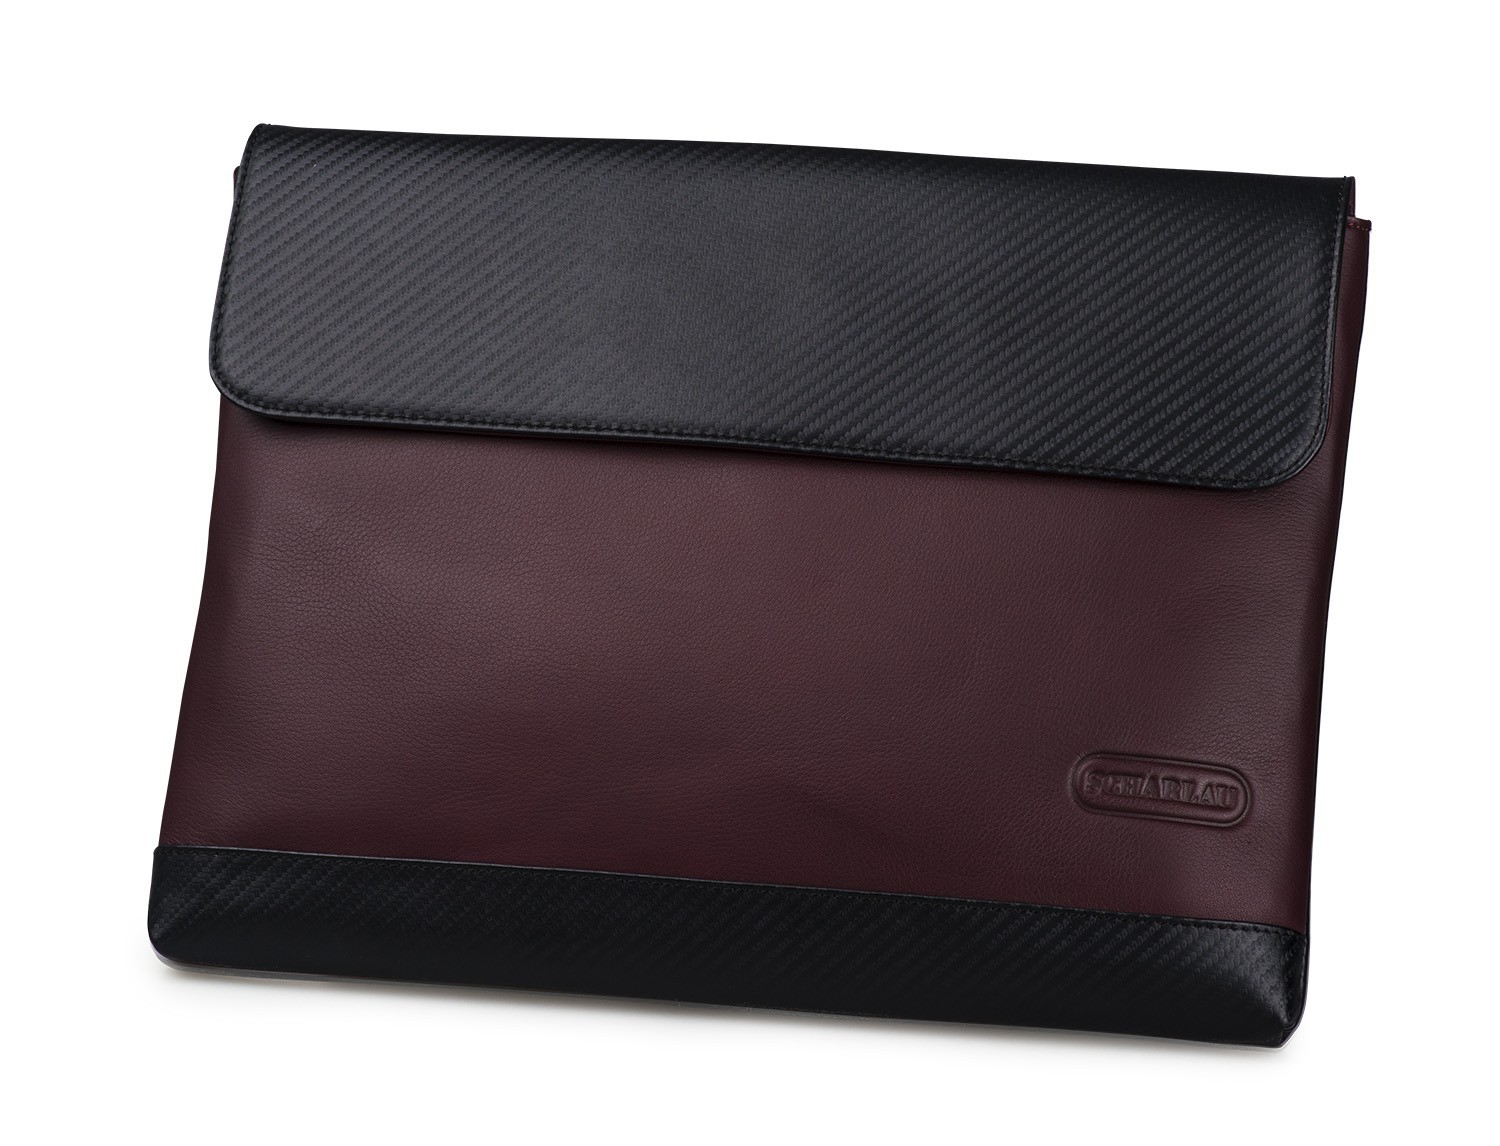 Leather laptop sleeve 13.3" inch in burgundy front